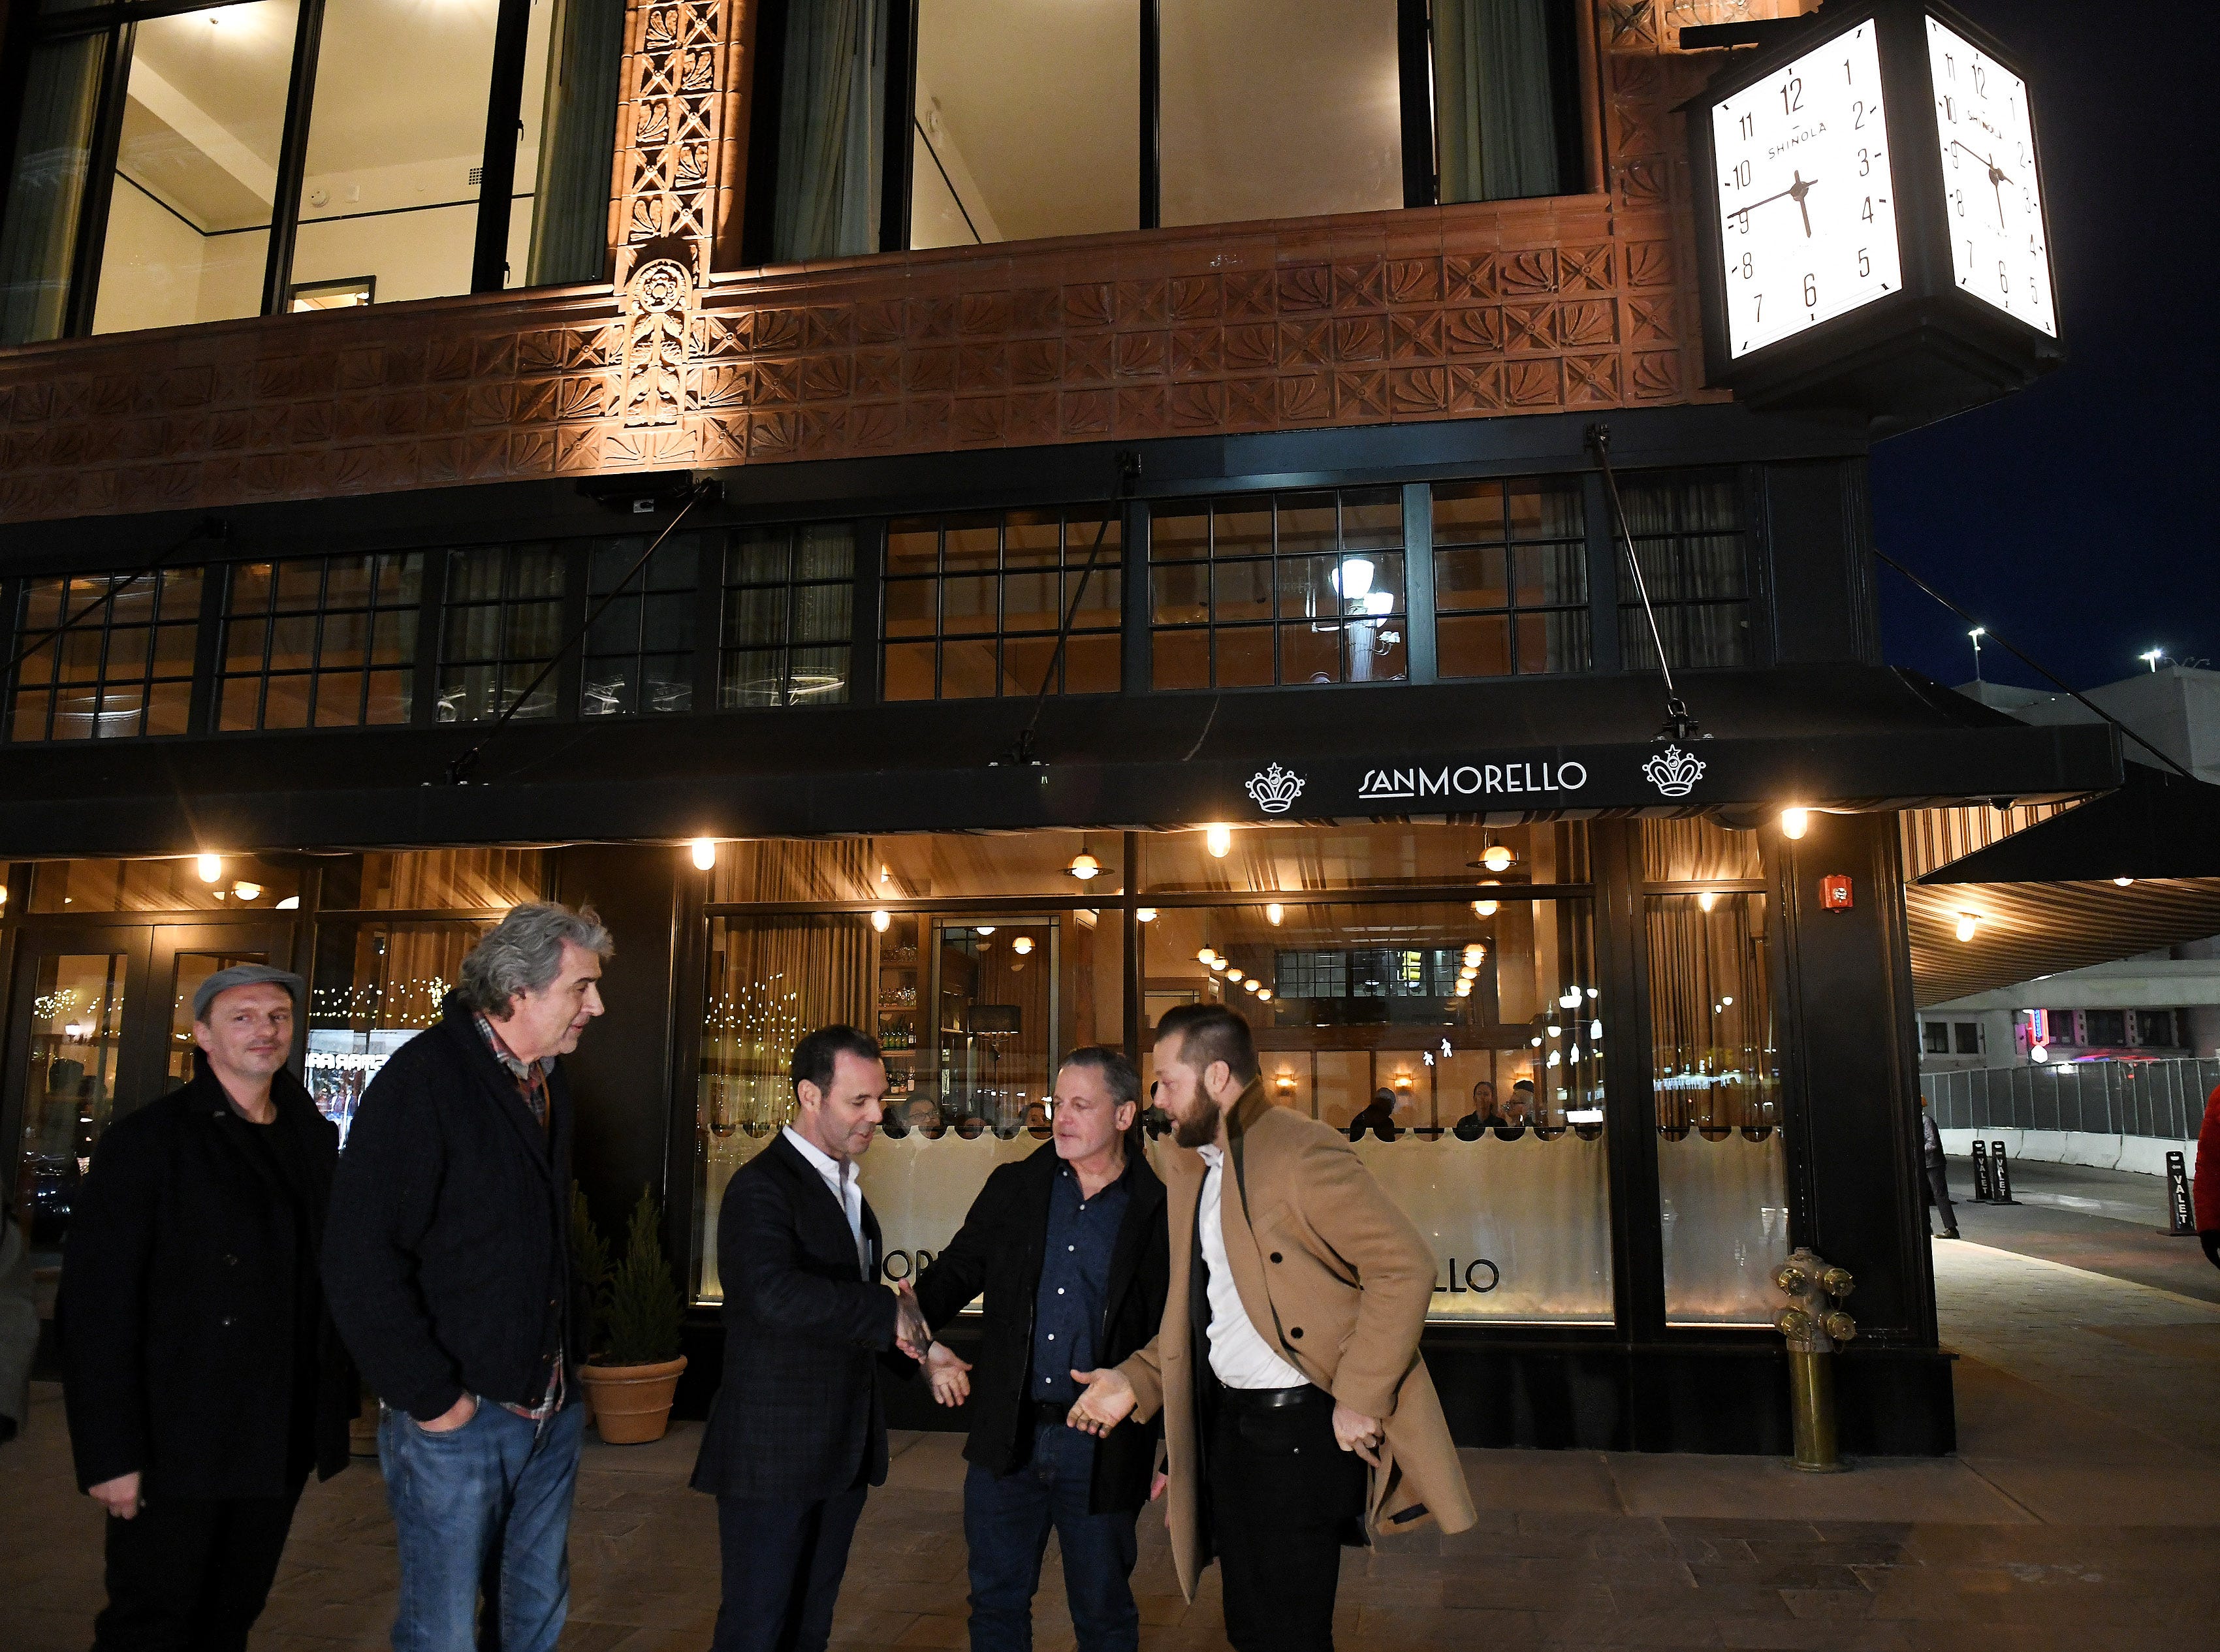 After the exterior lights are turned on, Dan Gilbert, second from right, shakes hands with Bedrock chairman Jim Ketai with Shinola founder Tom Kartsotis, second from left.